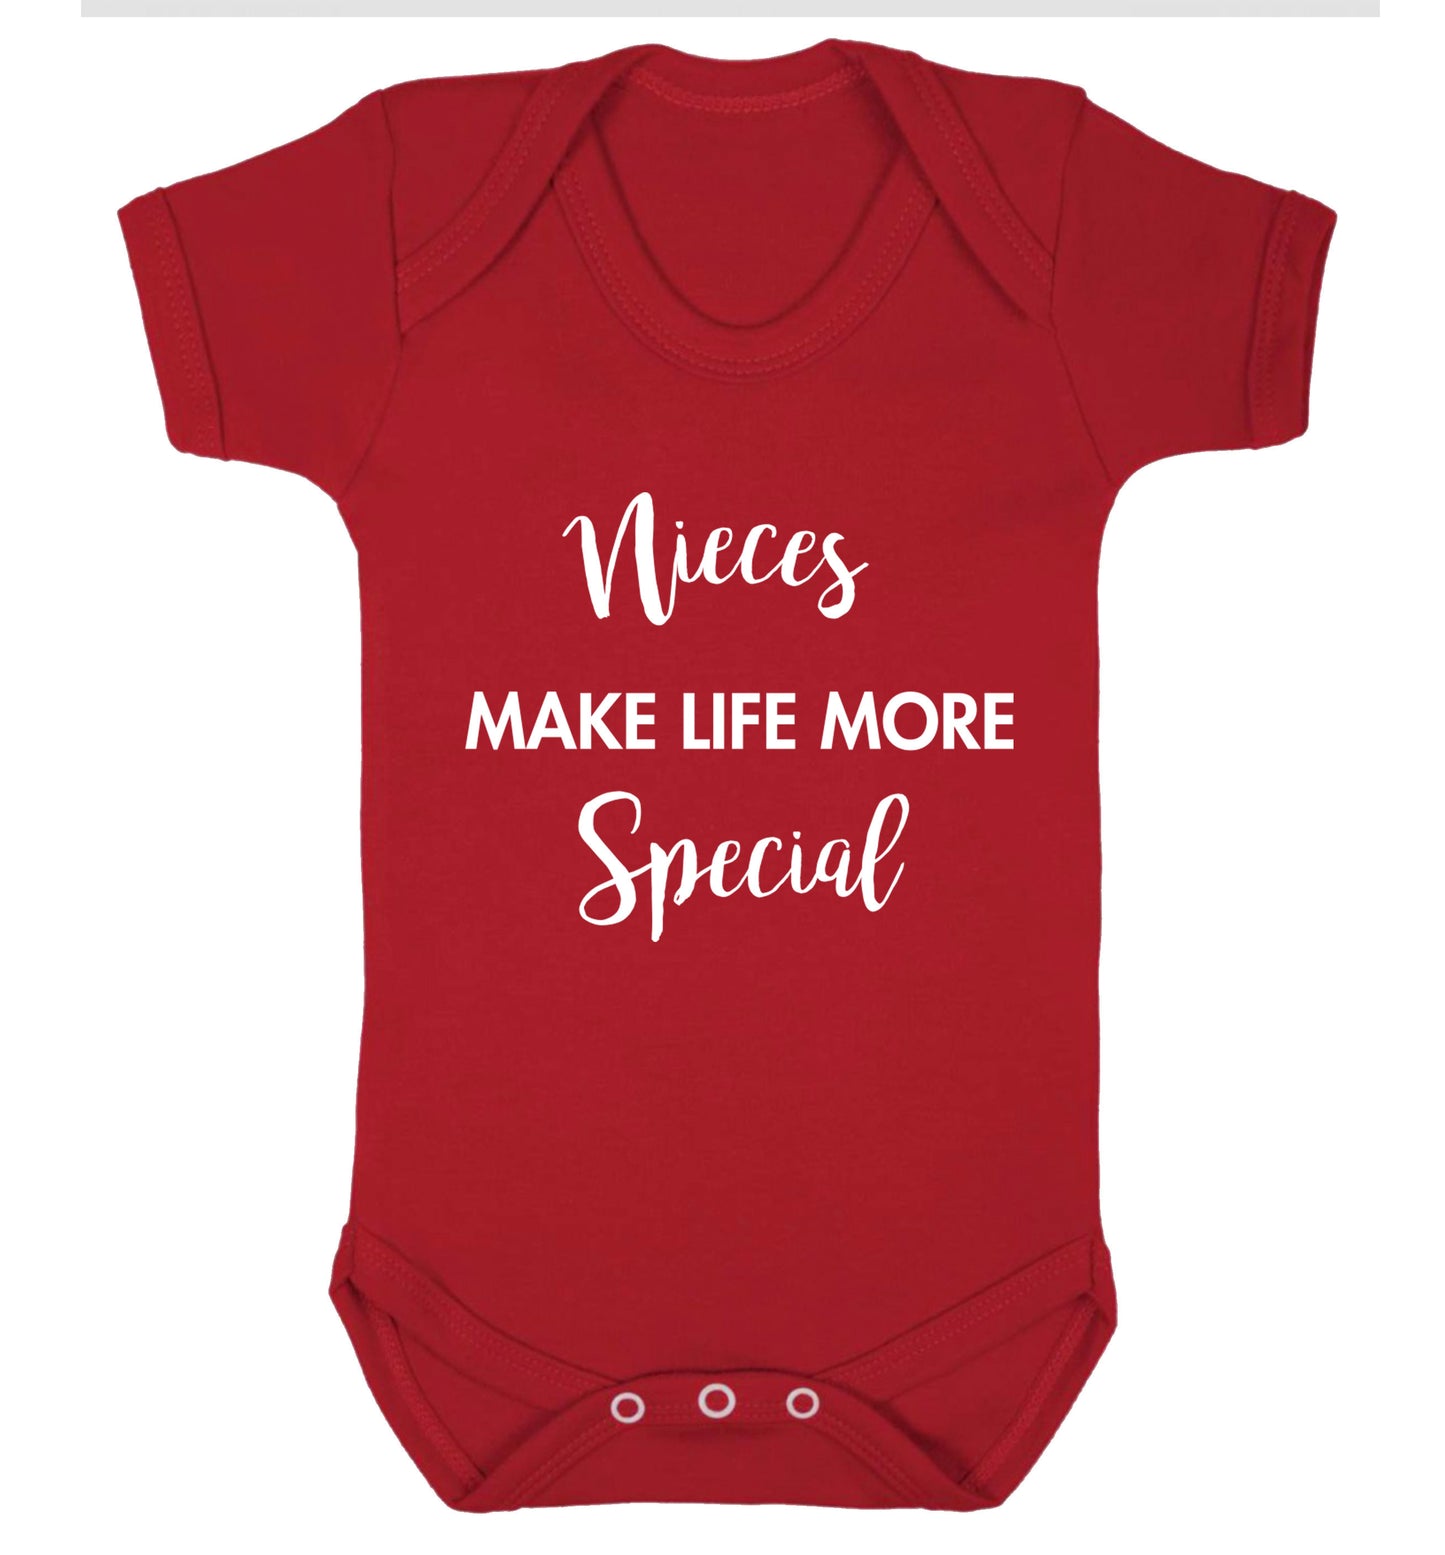 Nieces make life more special Baby Vest red 18-24 months